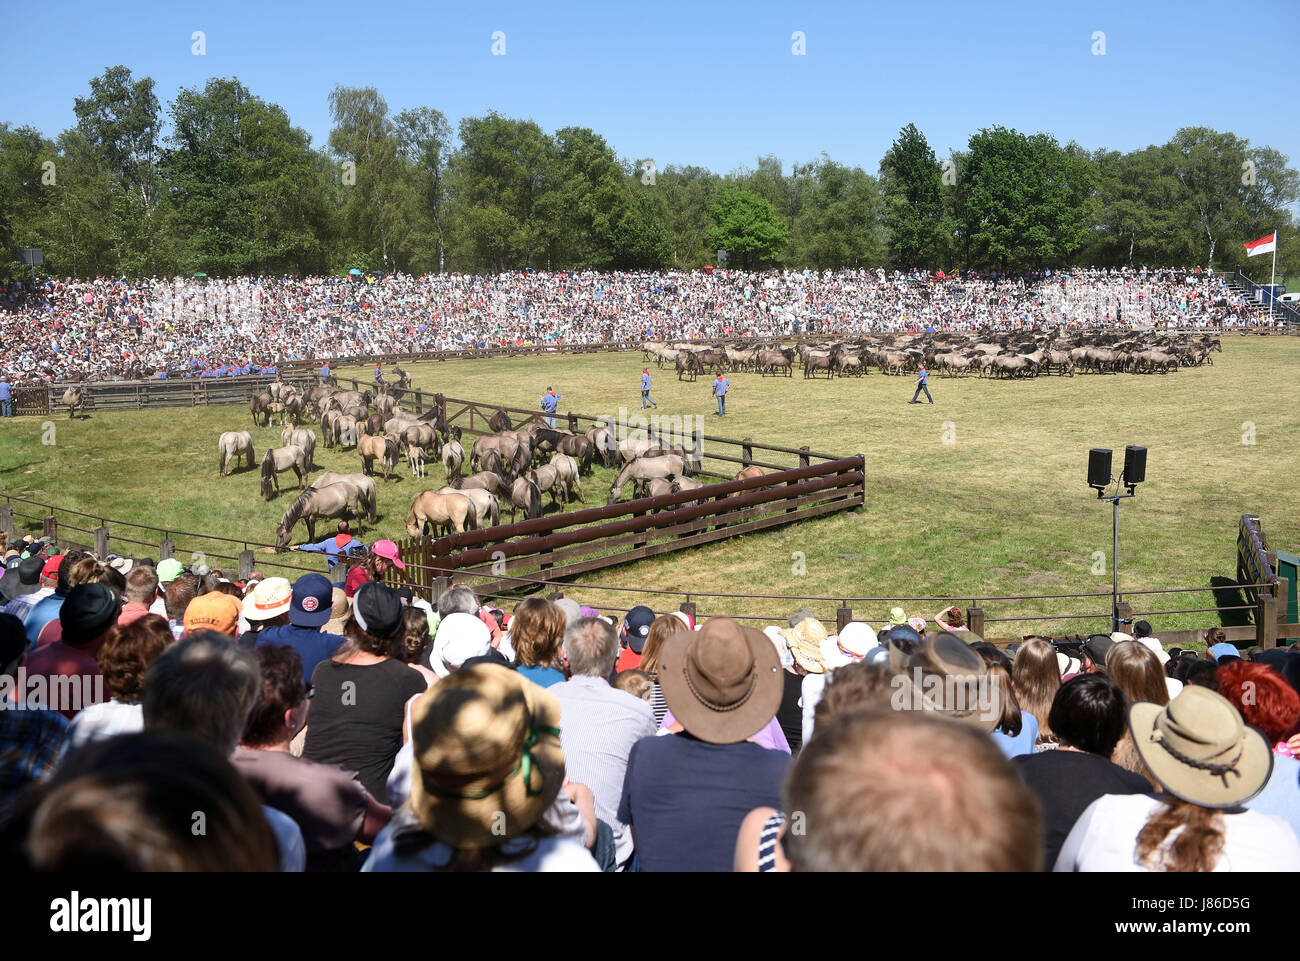 Duelmen, Germany. 27th May, 2017. Spectators watch the catching of wild horses in the Merfelder quarry in Duelmen, Germany, 27 May 2017. Each year the one-year-old stallions from the wild herds are caught and removed. Photo: Henning Kaiser/dpa/Alamy Live News Stock Photo